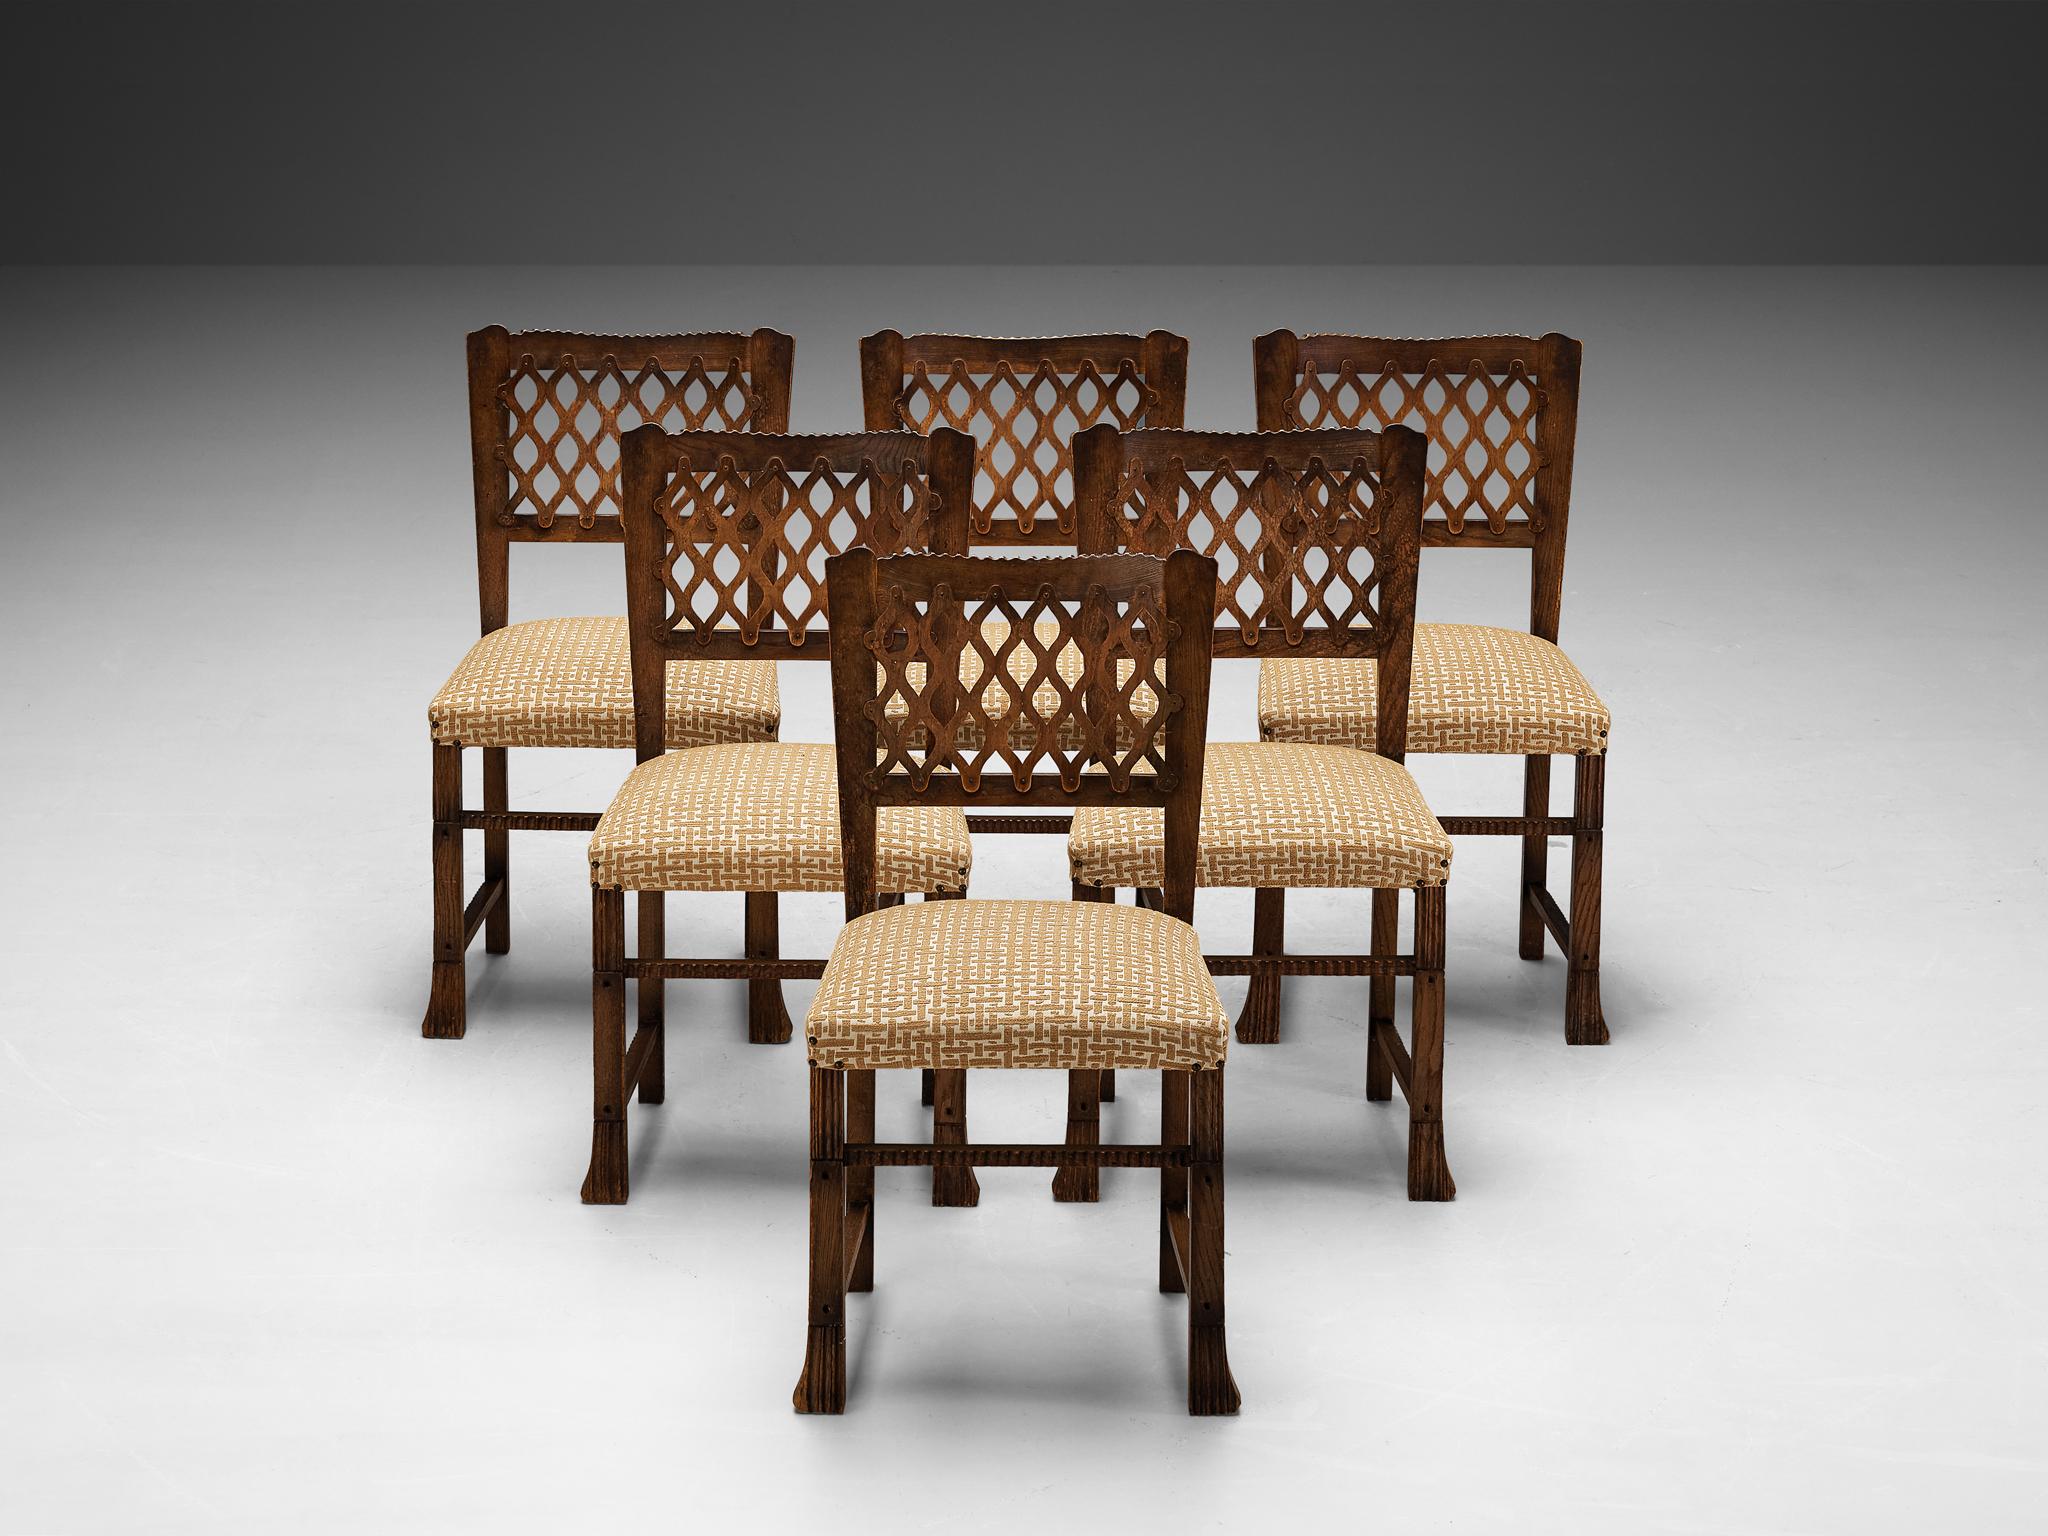 Ernesto Valabrega, set of six dining chairs, chestnut, fabric, Italy, circa 1935

These well-sculpted chairs are created in one of the most influential periods for the arts namely the Art Deco Movement. The chairs bear witness to the designer's